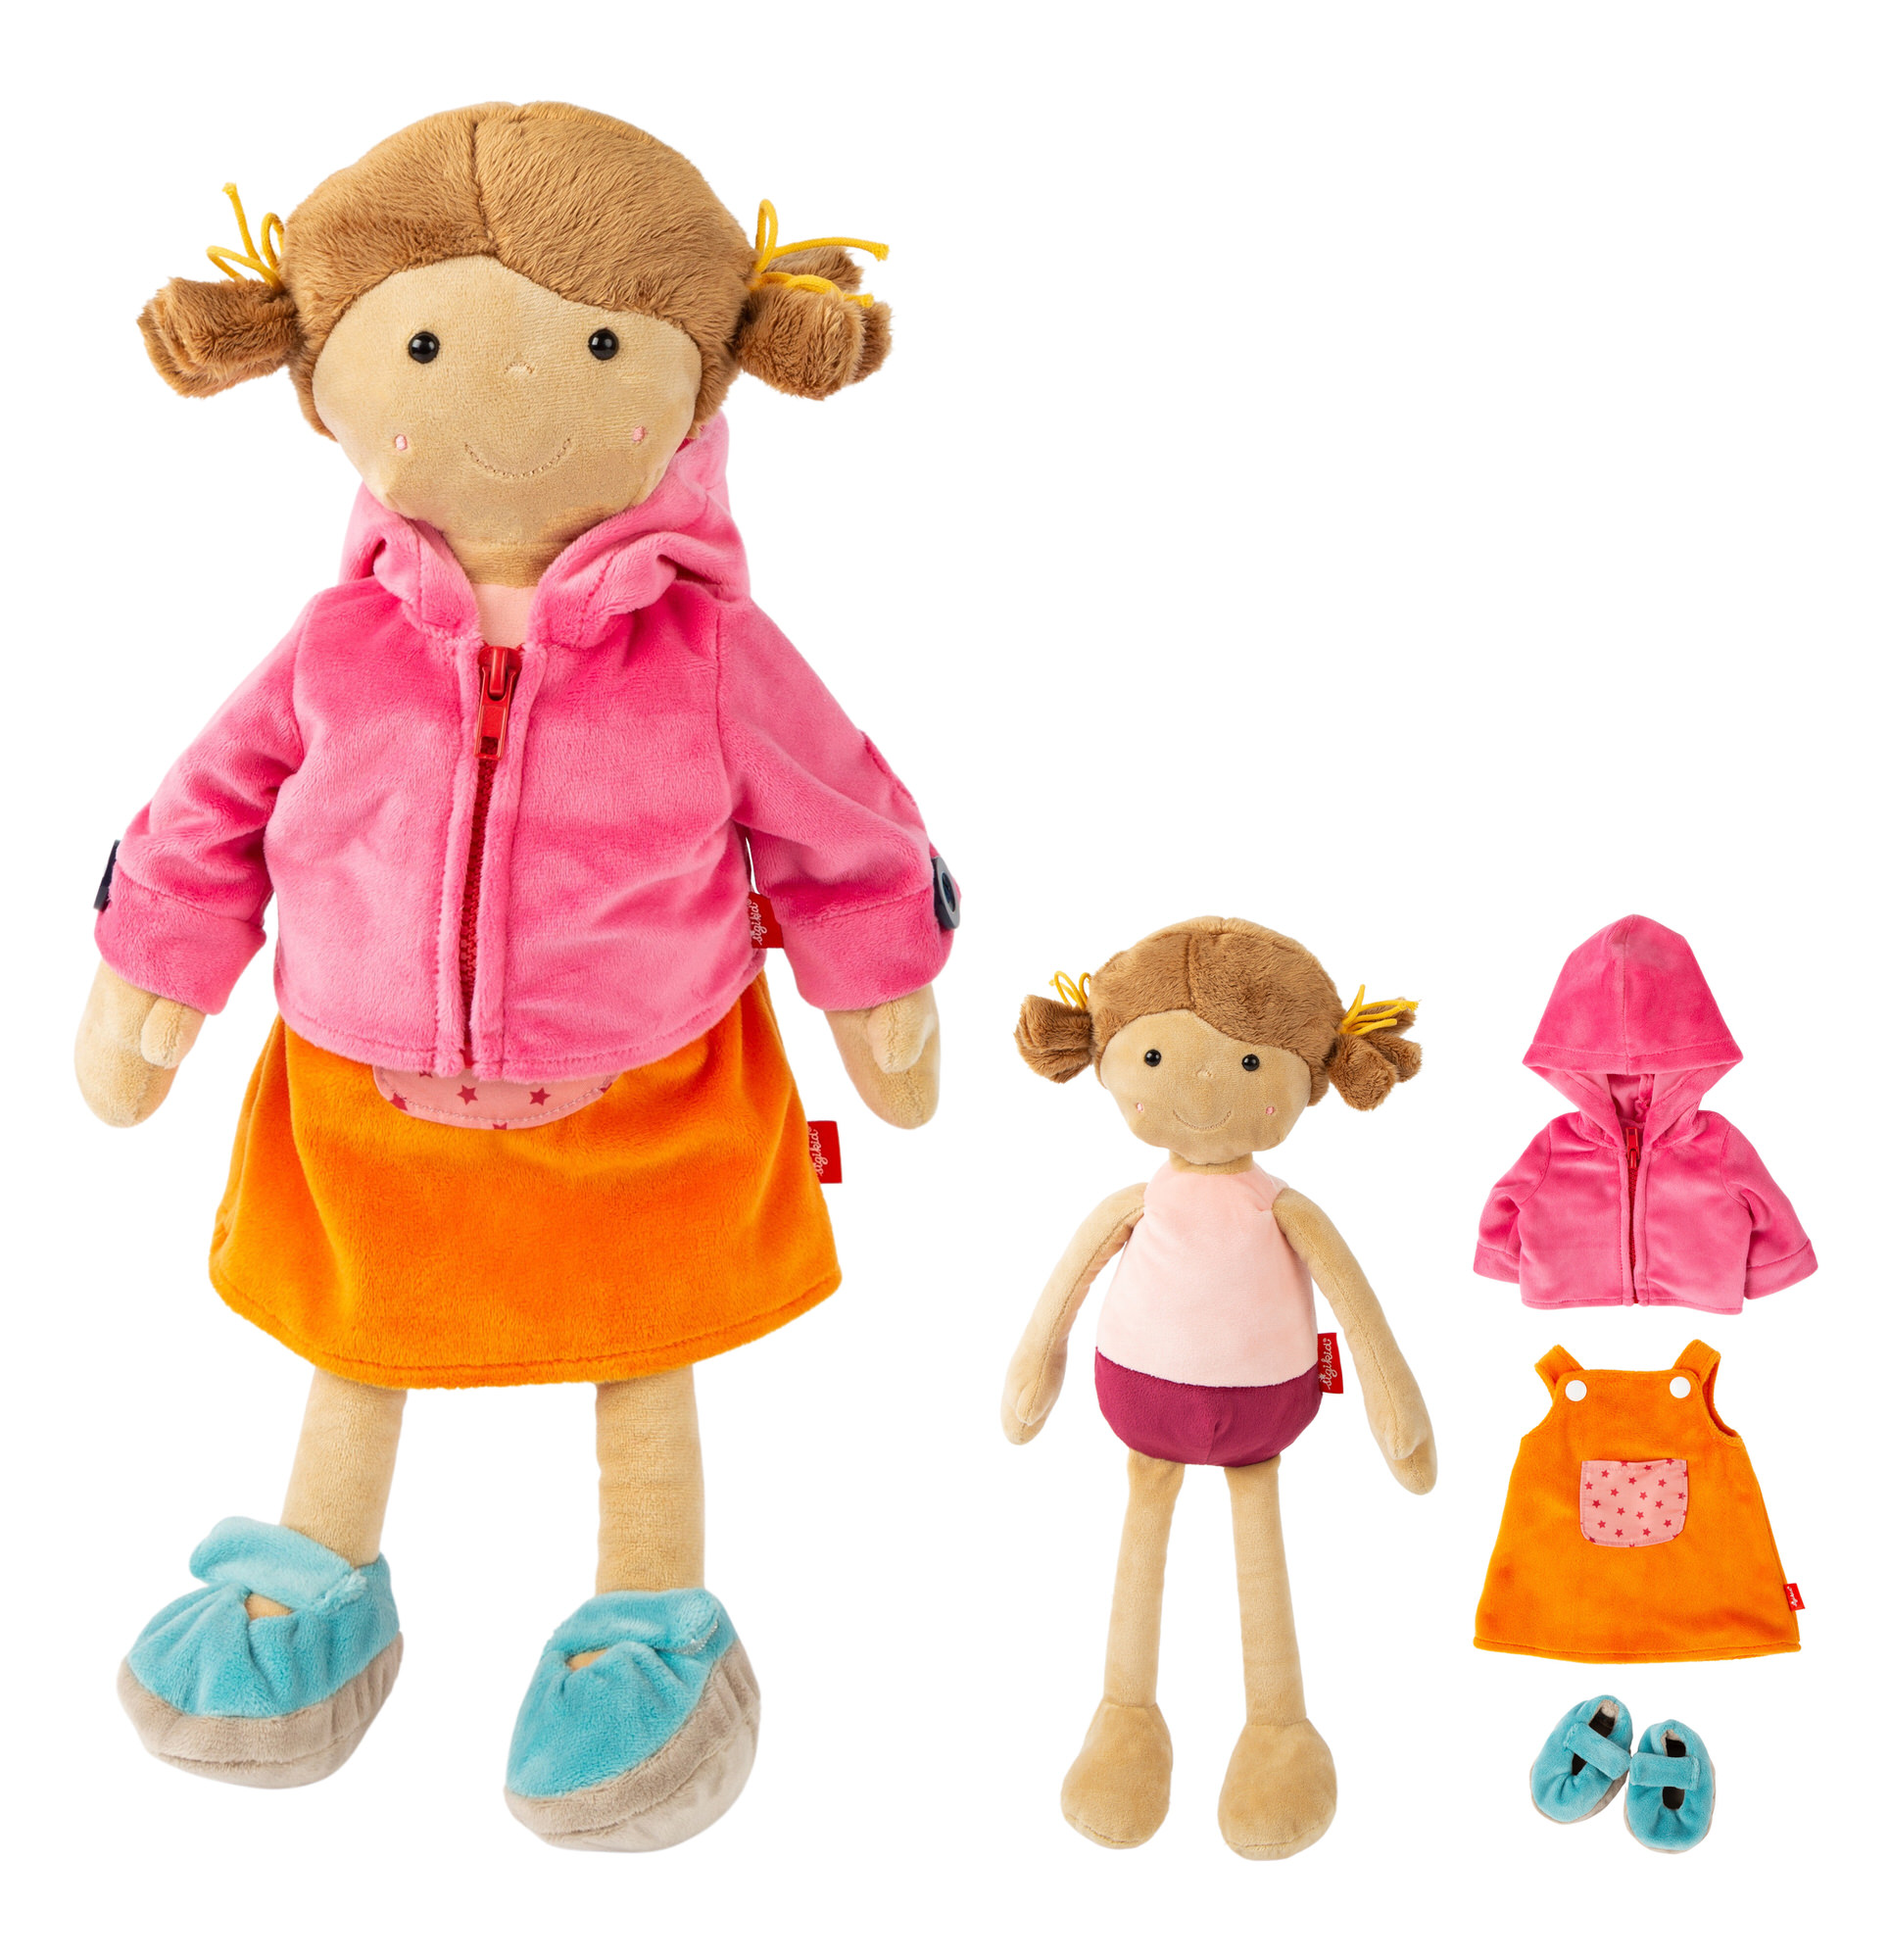 Learn-how-to-dress soft doll